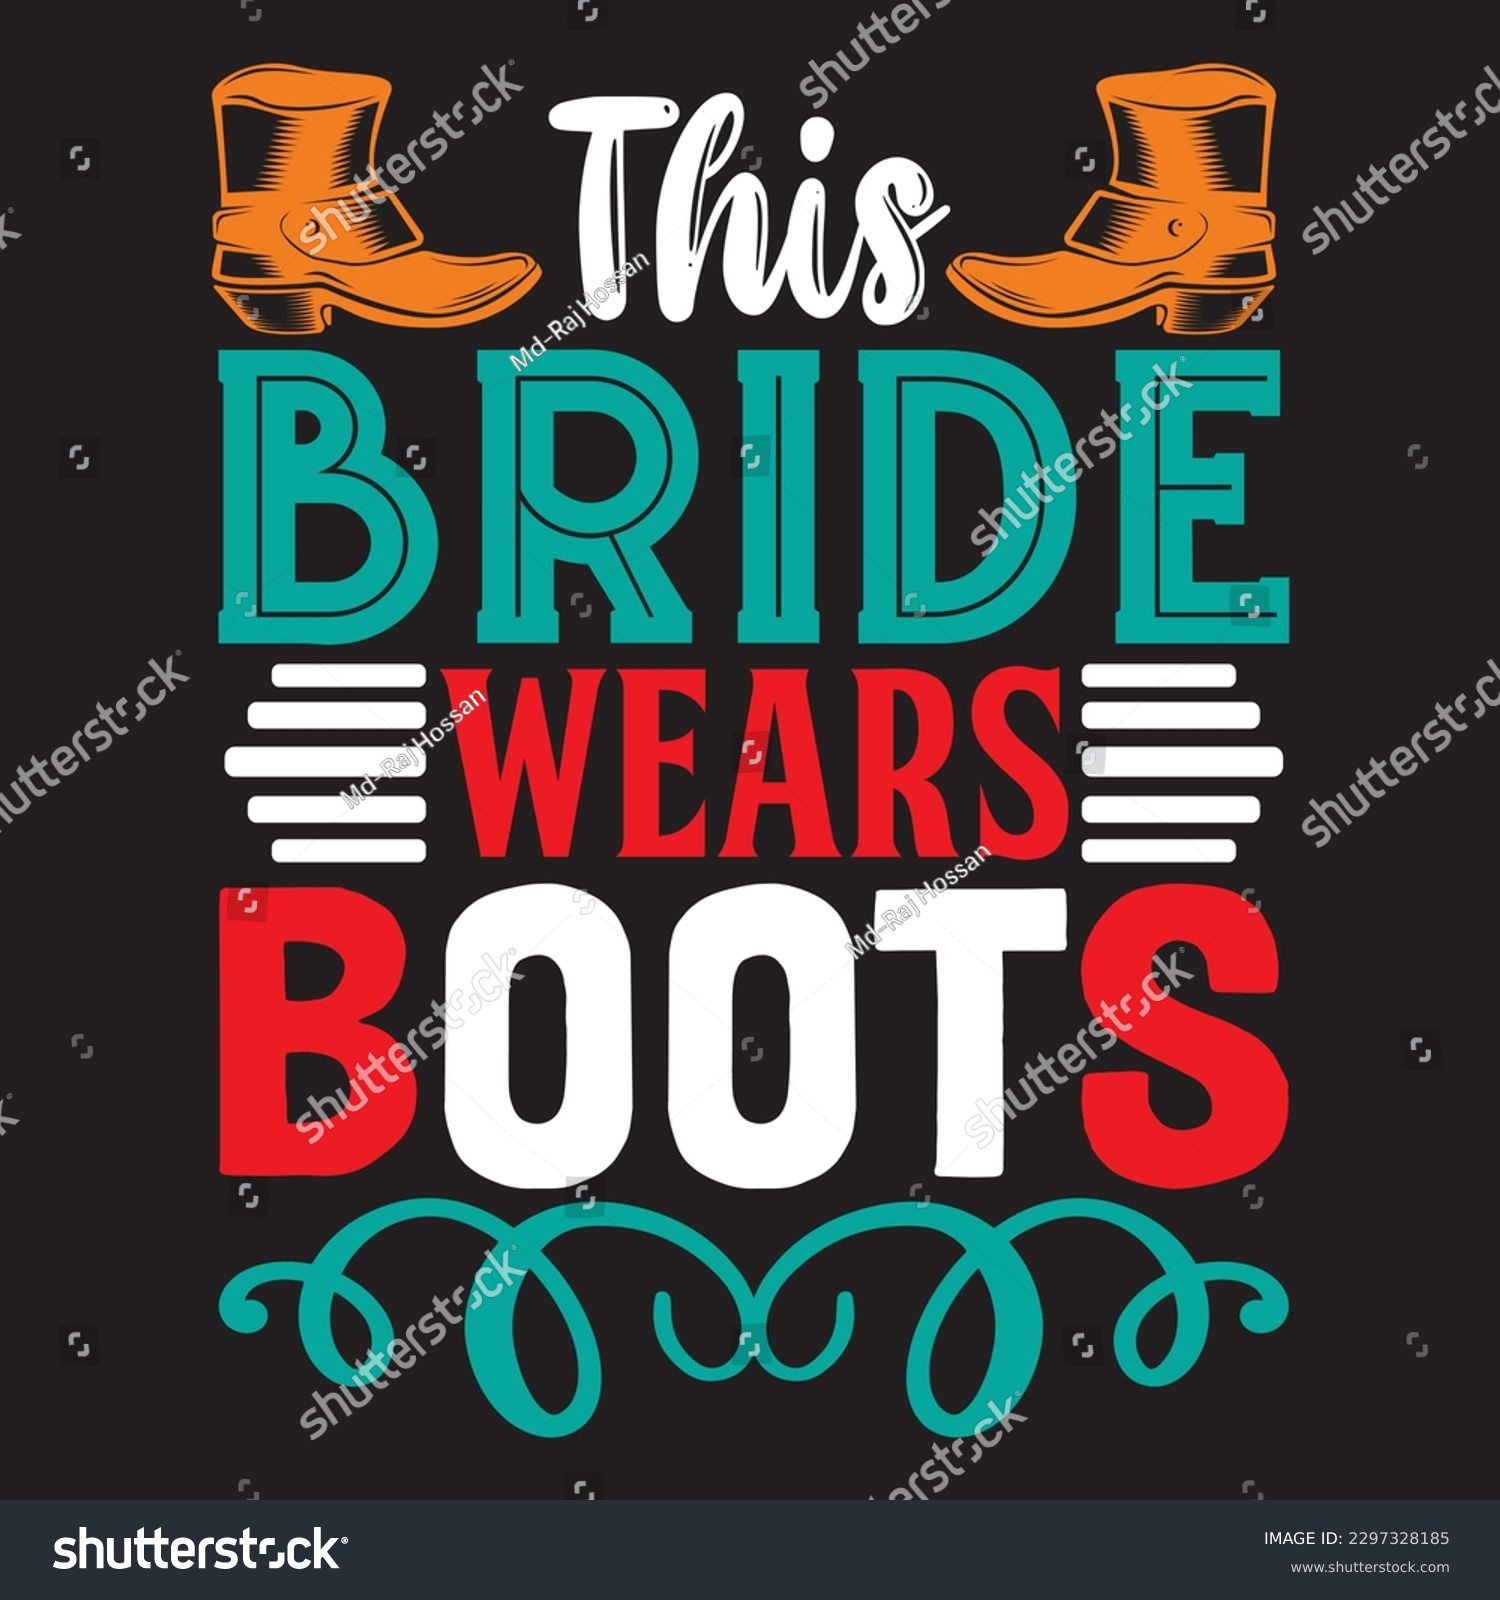 SVG of This Bride Wears Boots T-shirt Design Vector File svg